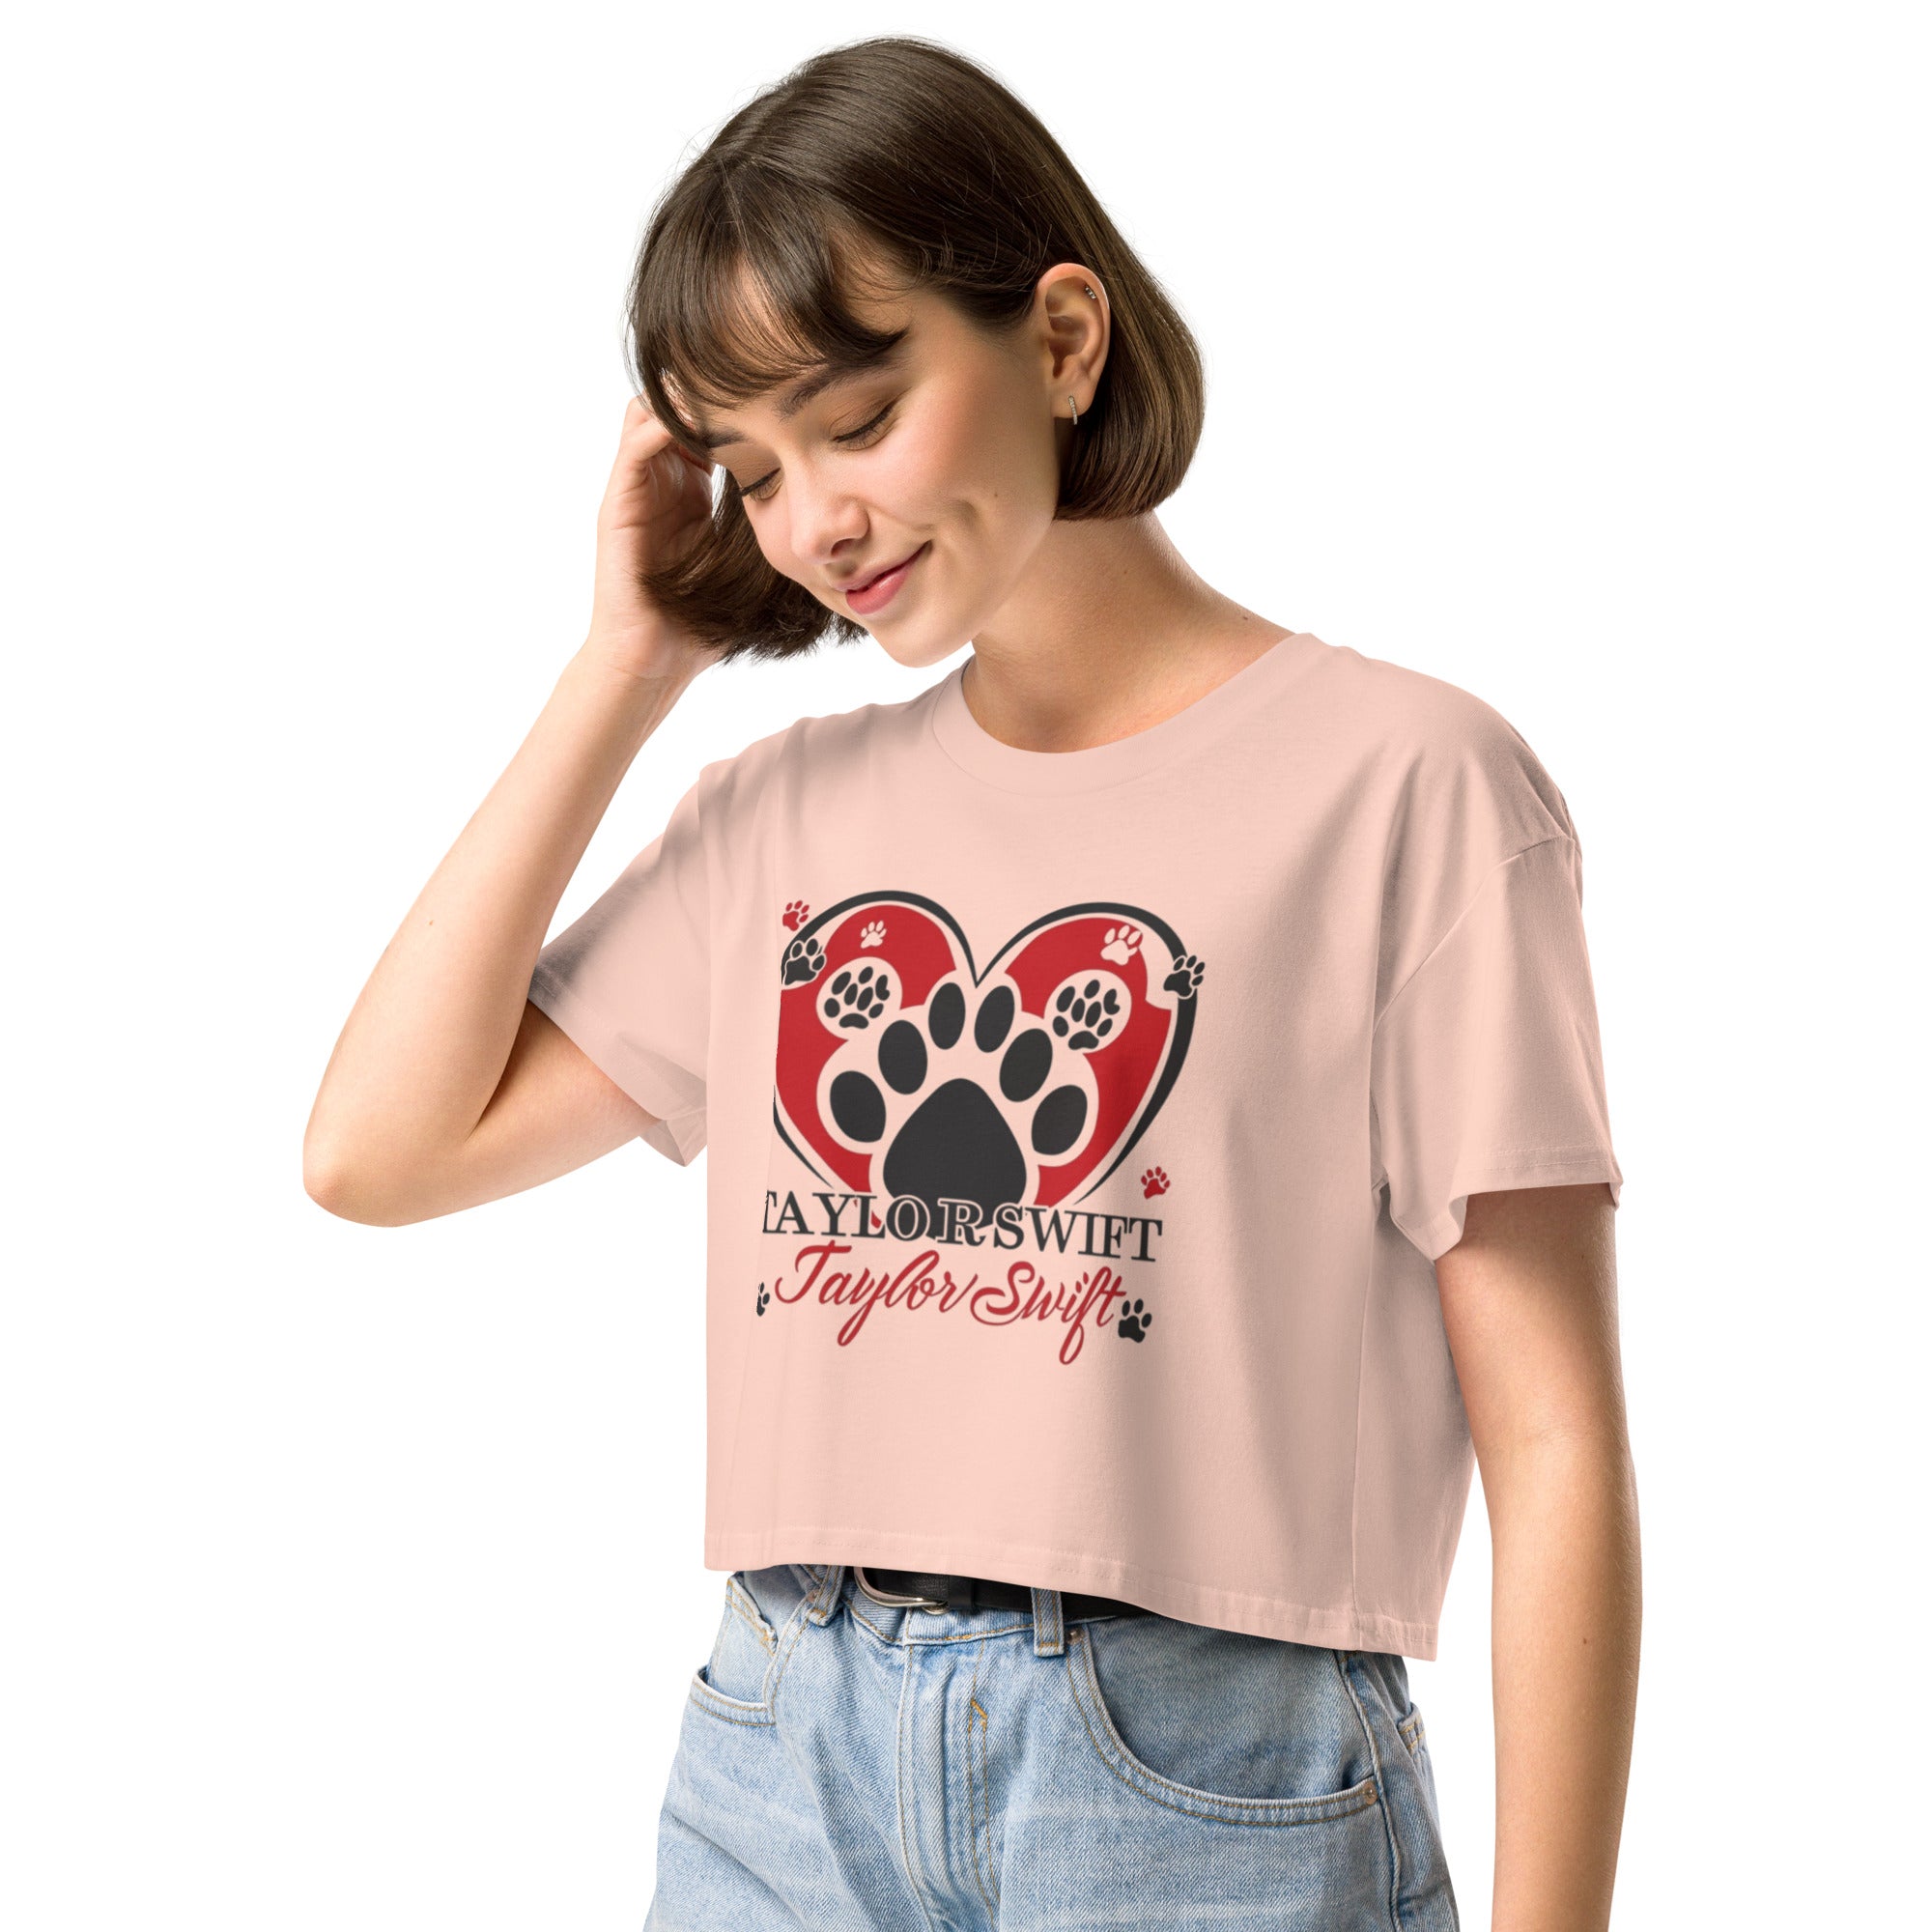 Women’s crop top. A Purr-fect Blend of Pet Love and Taylor Admiration!